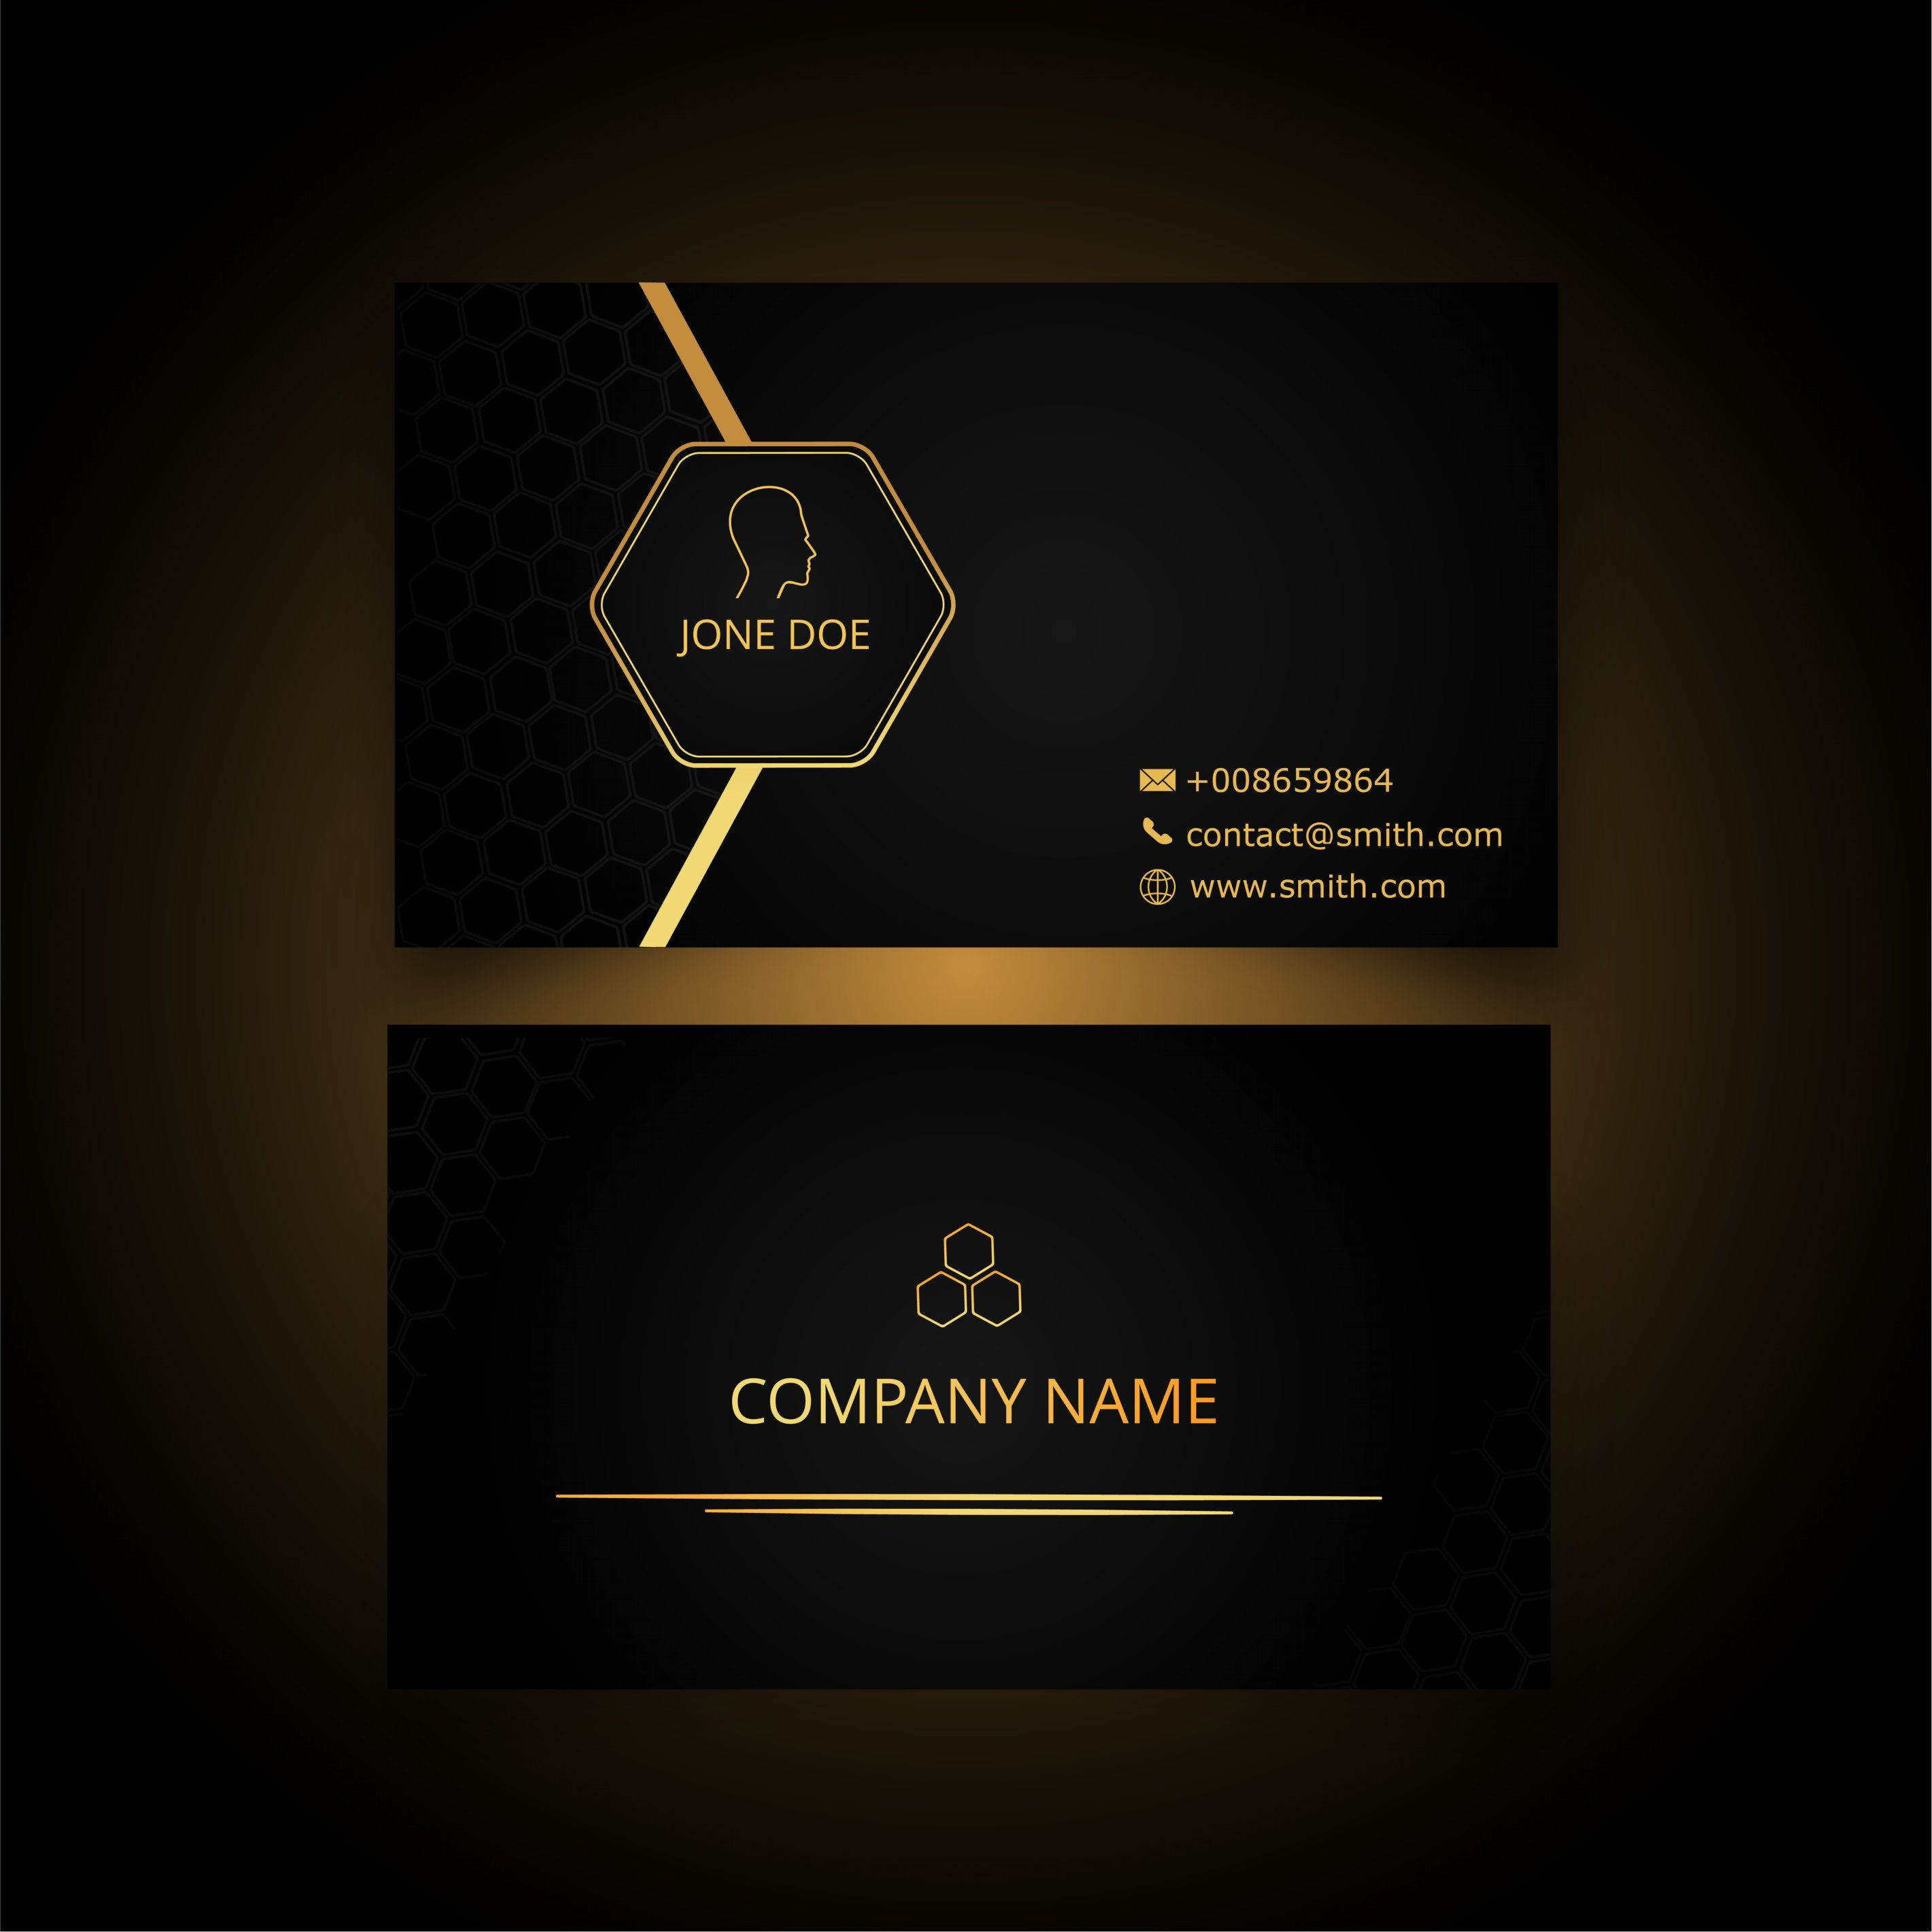 Modern Business Card Template Available On Freepik Of Business Card Design Template